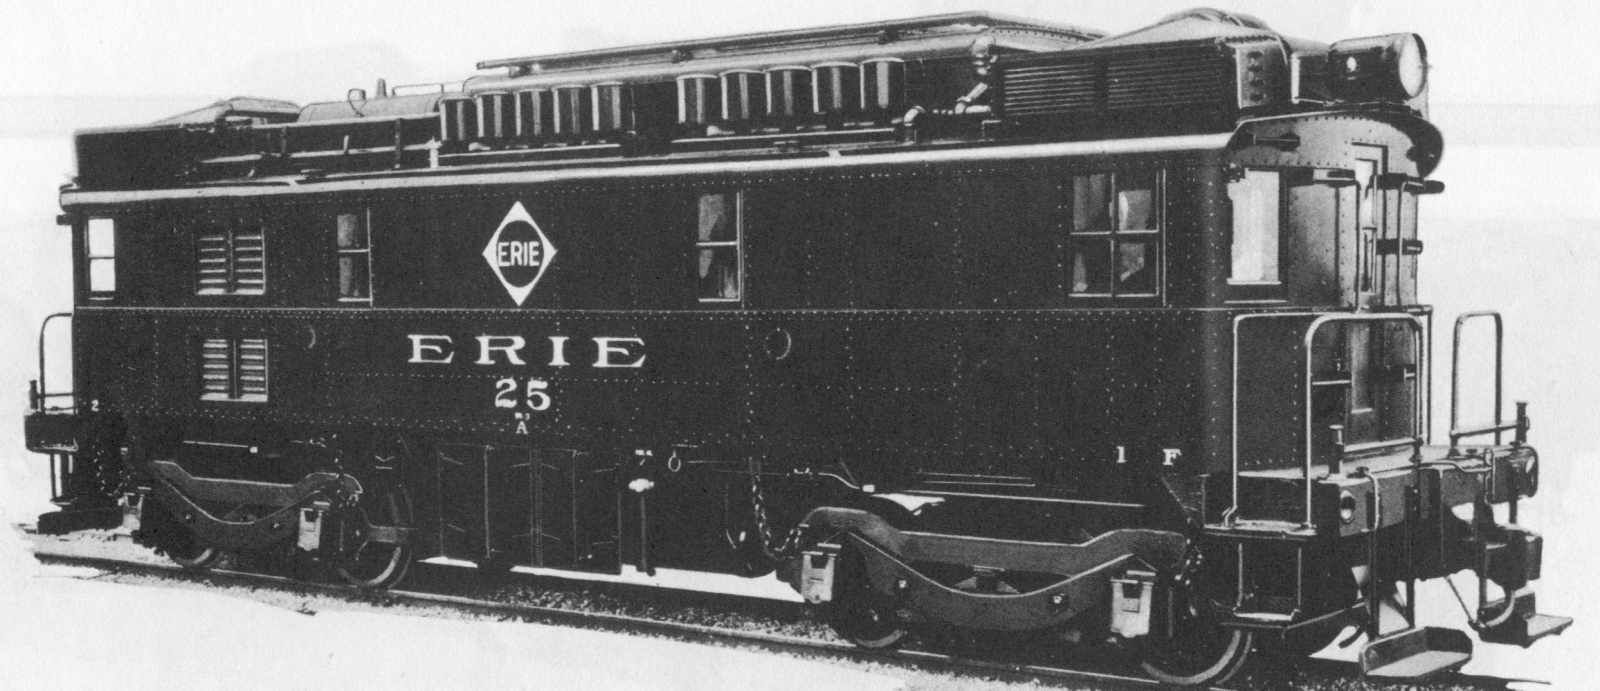 Erie Railroad No. 25 with the single 800 hp engine